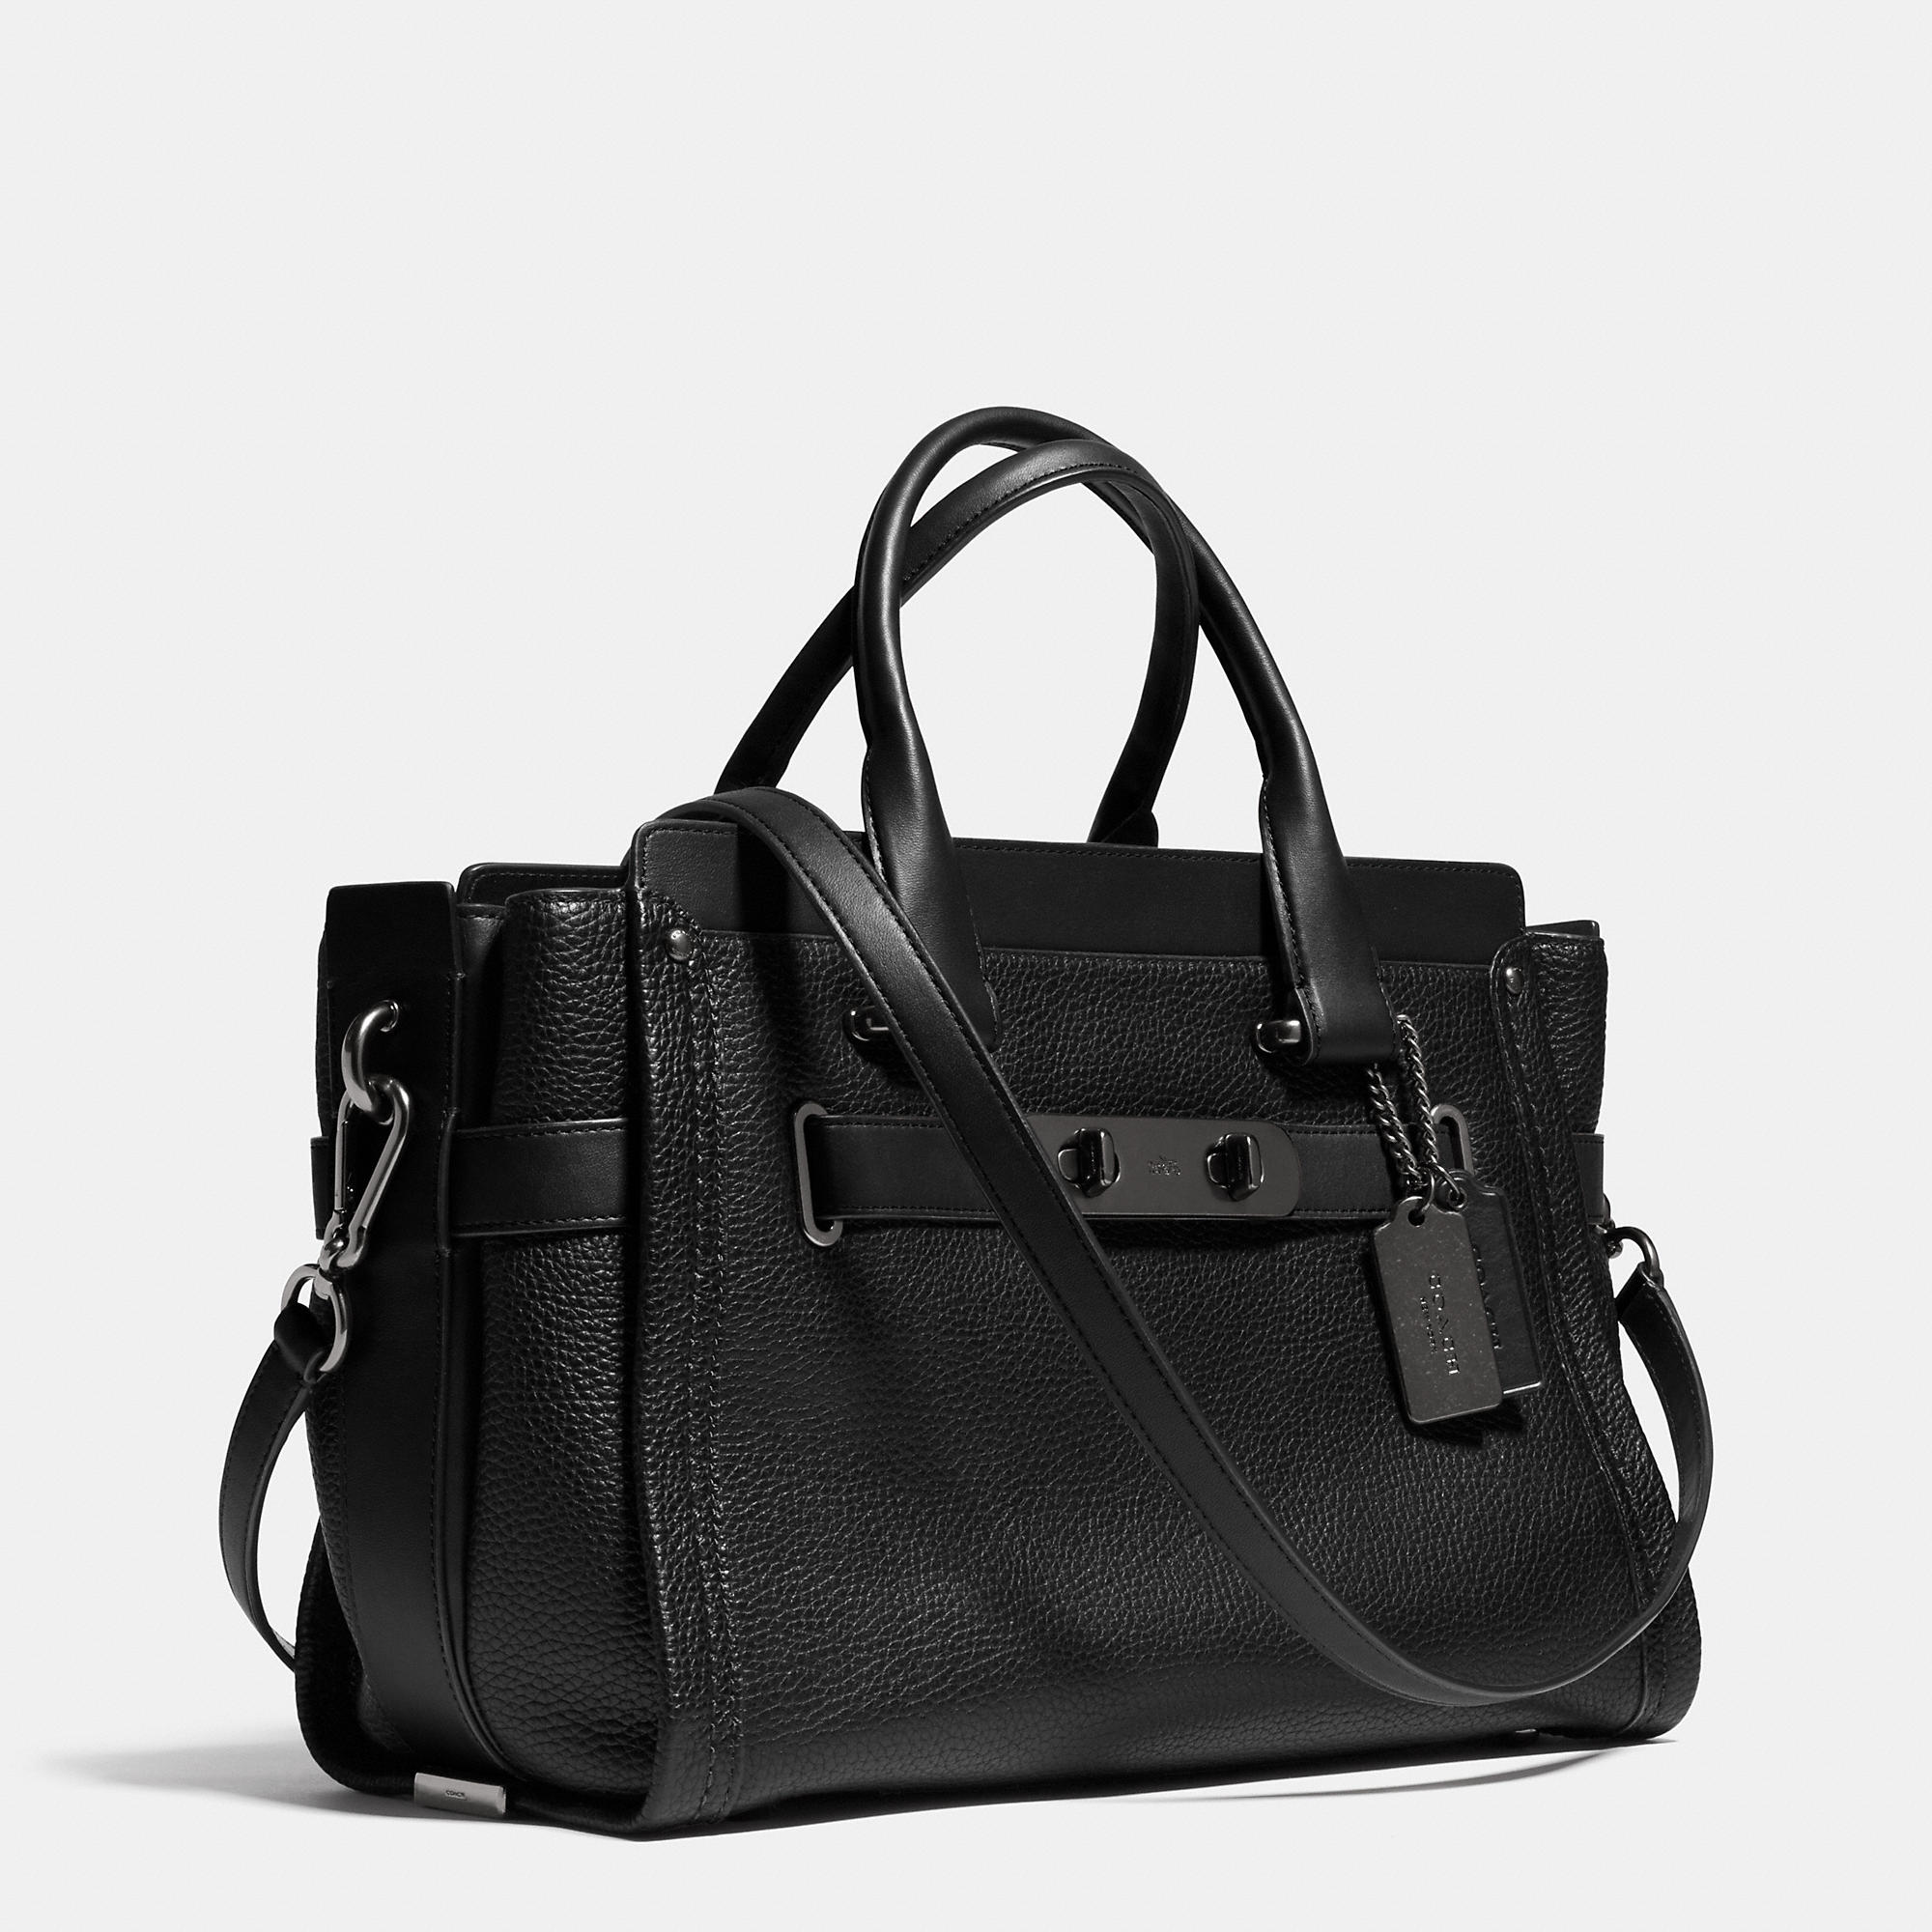 New Realer Coach Swagger Carryall In Pebble Leather